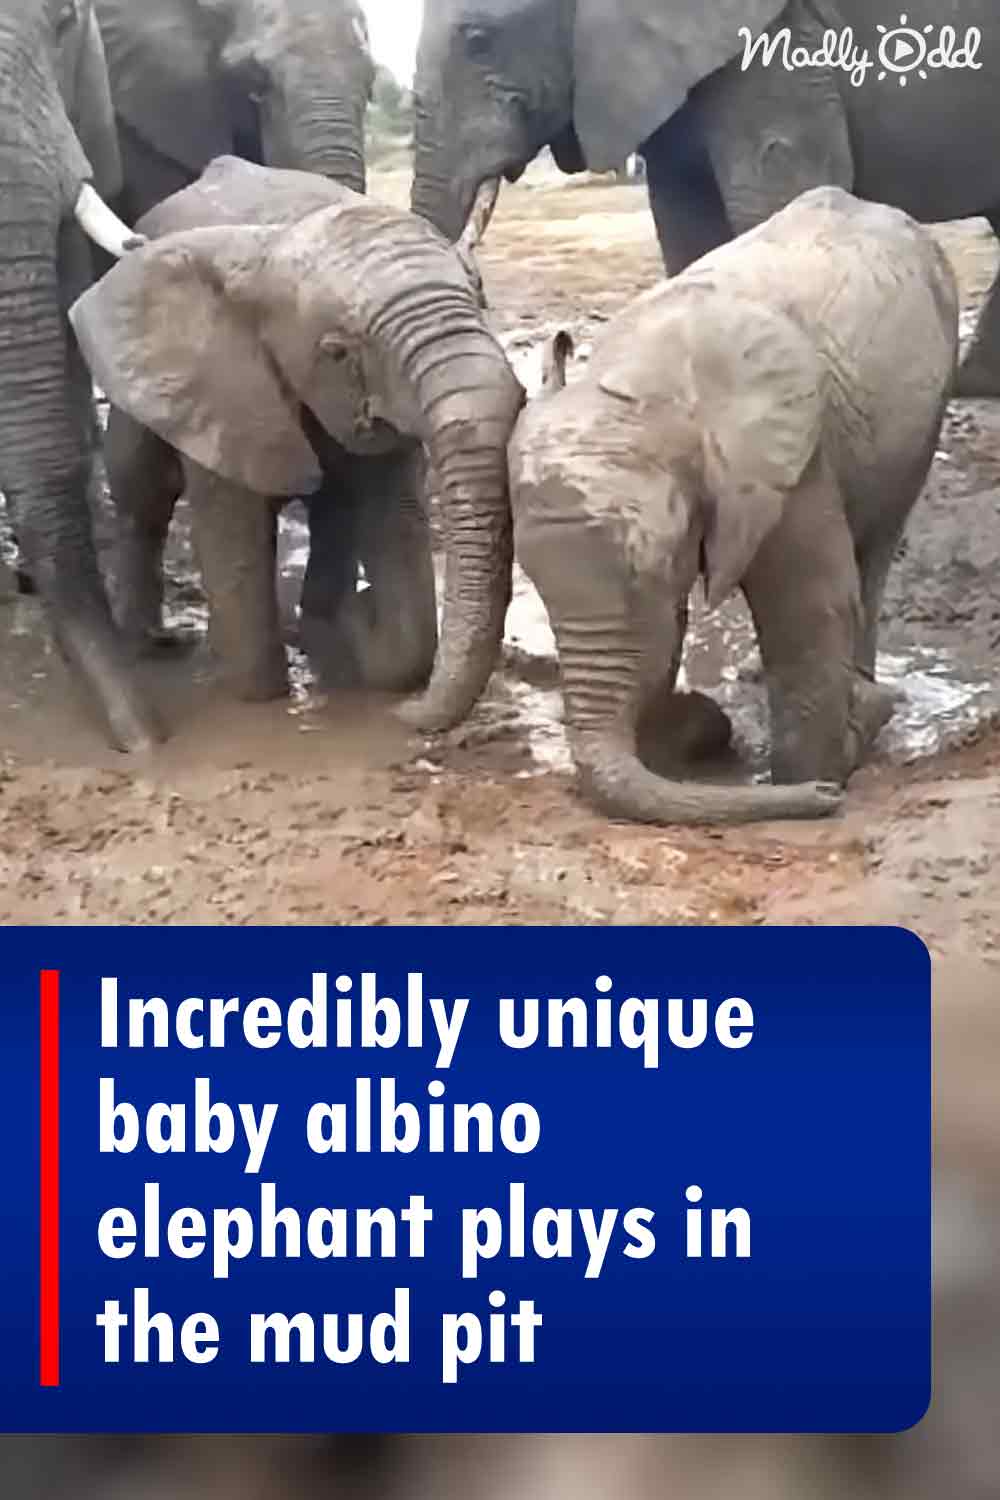 Incredibly unique baby albino elephant plays in the mud pit